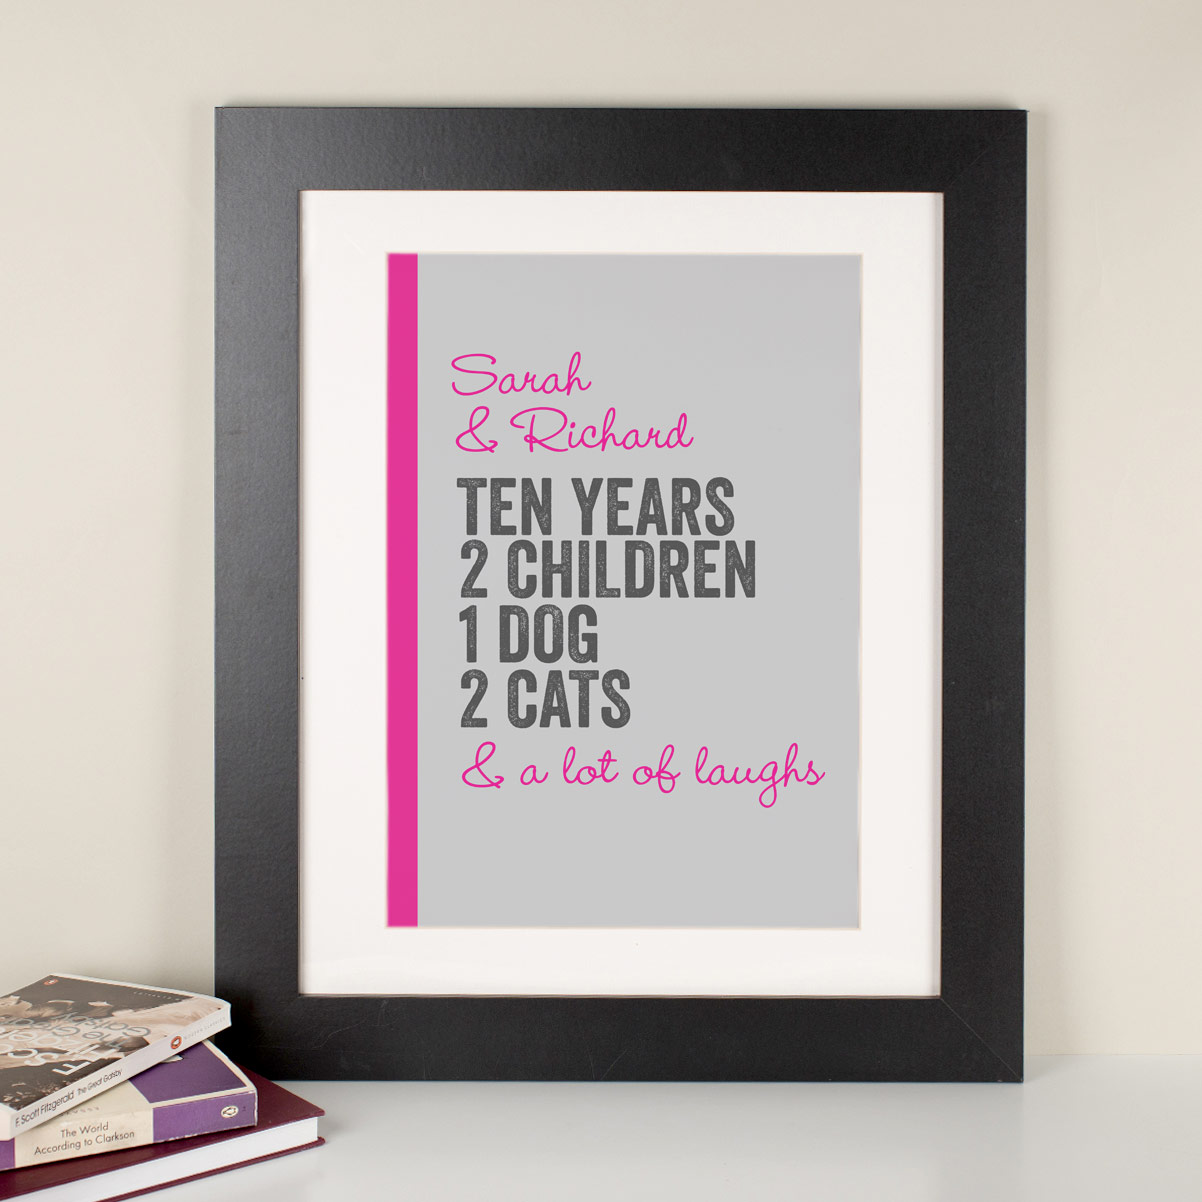 Personalised Framed Print - Couple's Life